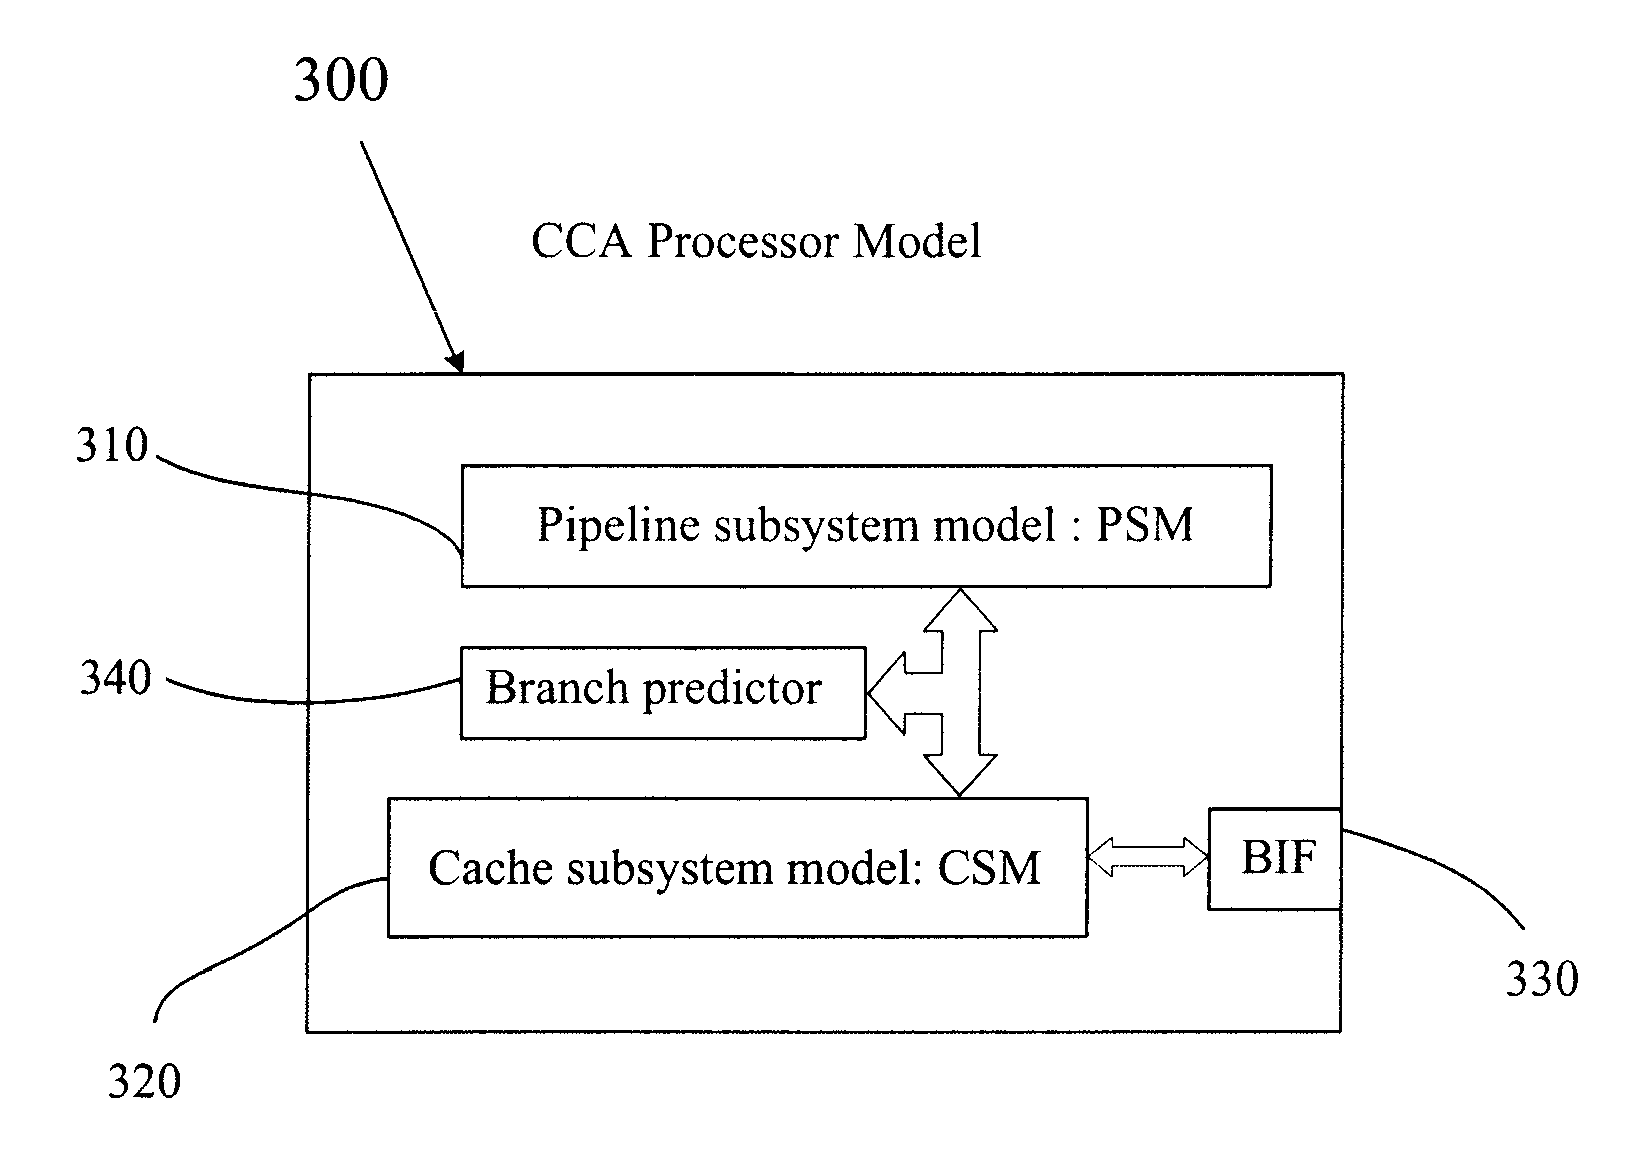 Cycle-Count-Accurate (CCA) Processor Modeling for System-Level Simulation